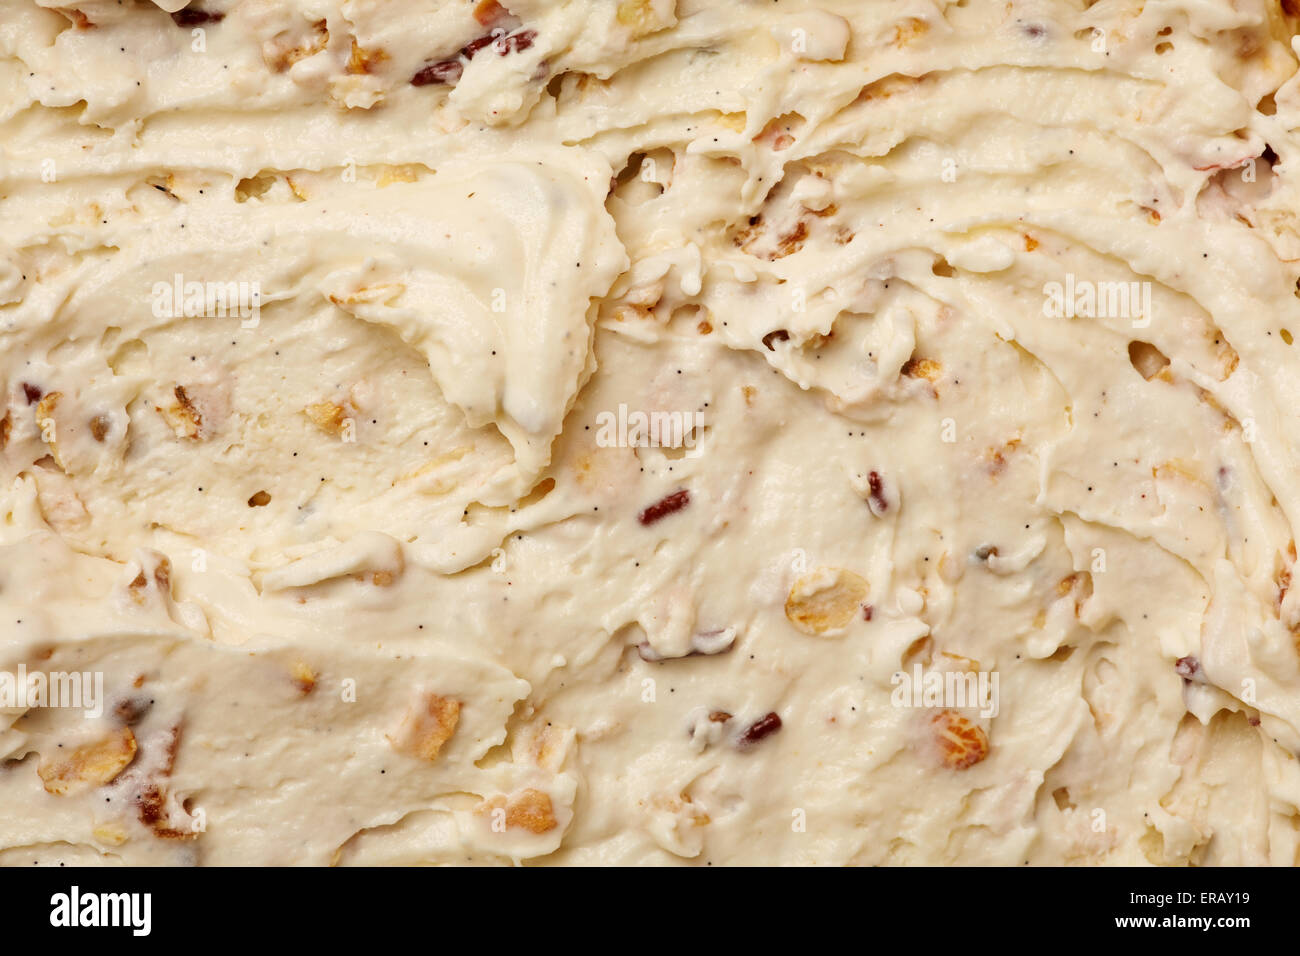 Texture of granola ice cream as background from above Stock Photo